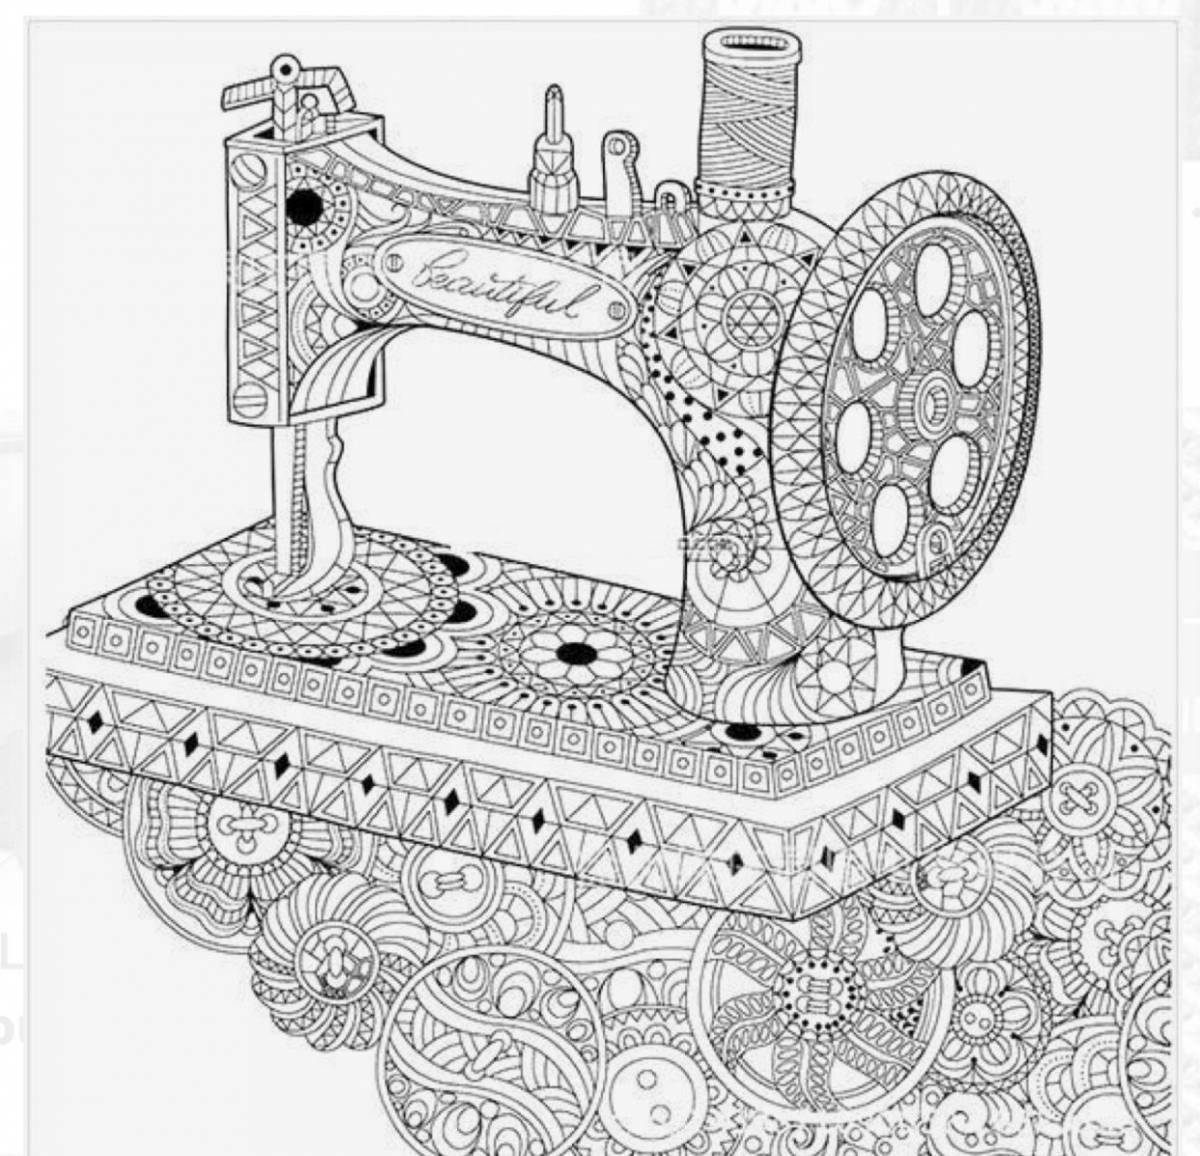 Delightful sewing machine coloring page